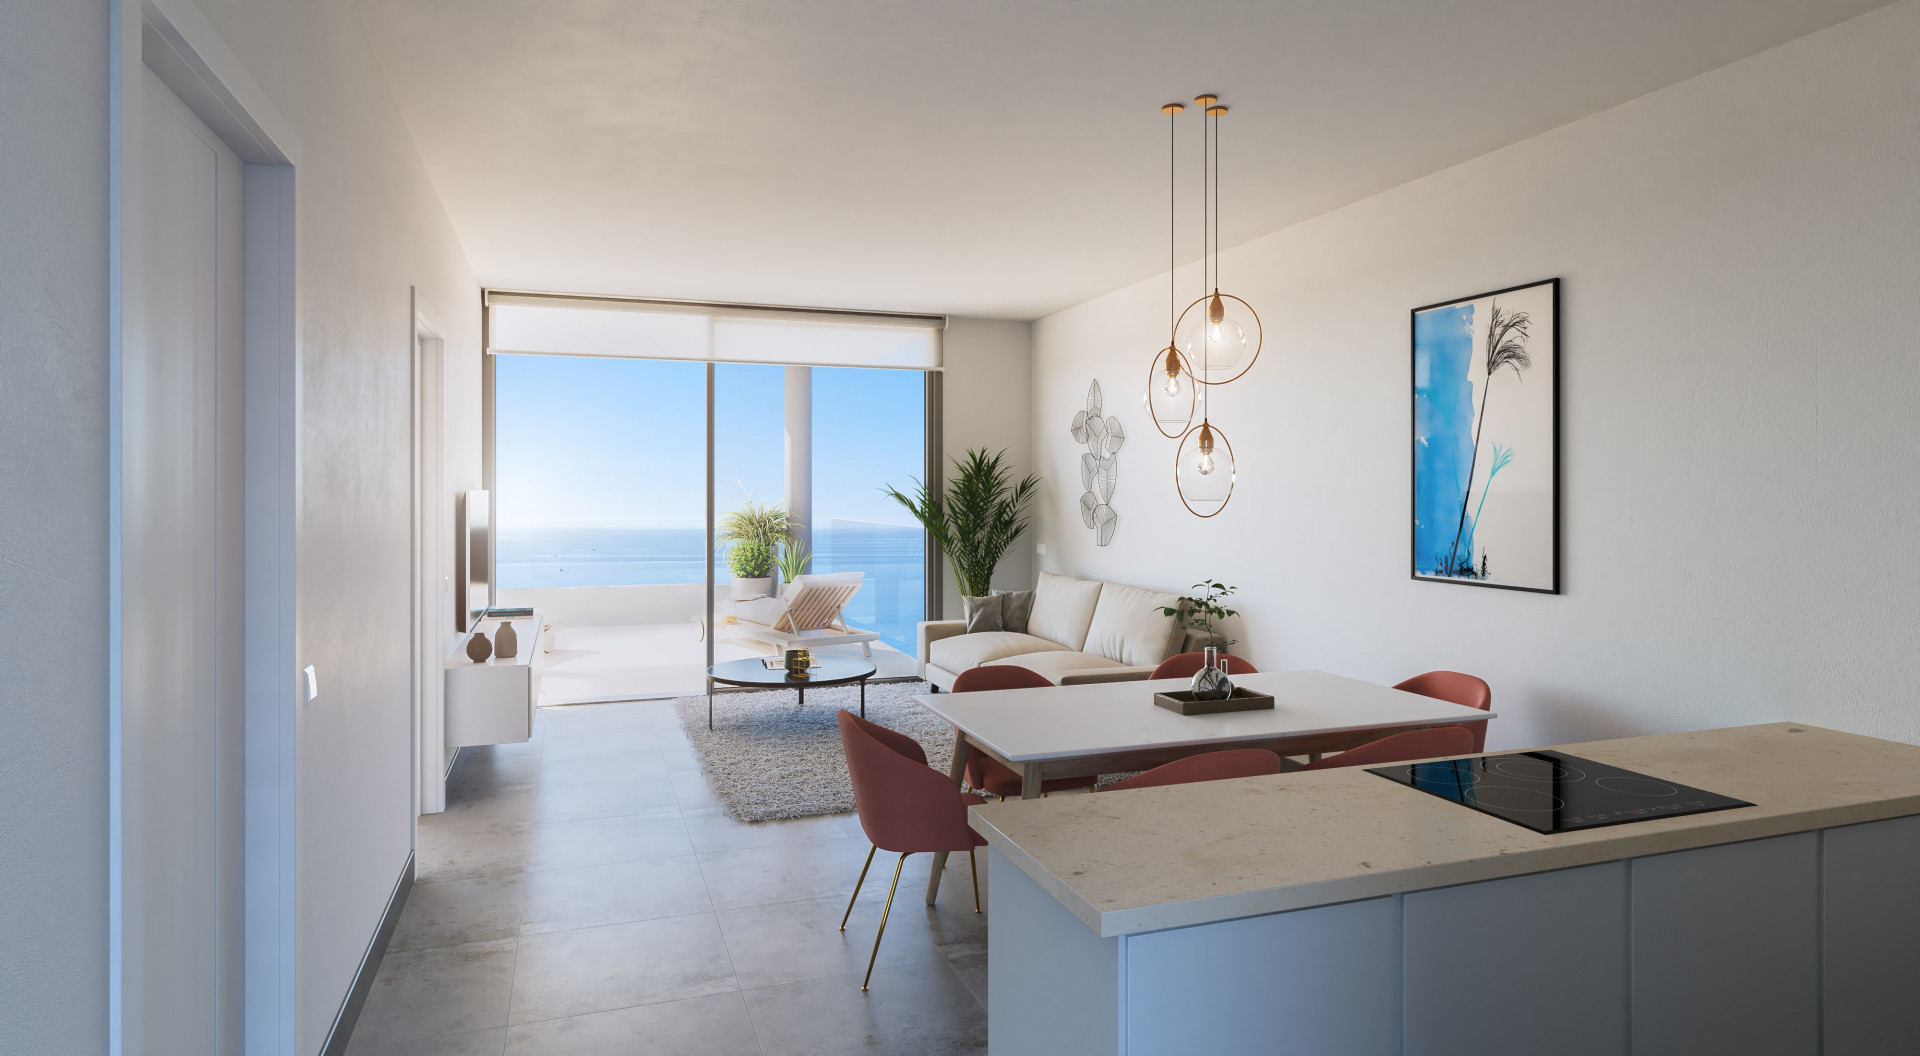 New project of contemporary apartments for sale in Reserva del Higuerón – Benalmadena